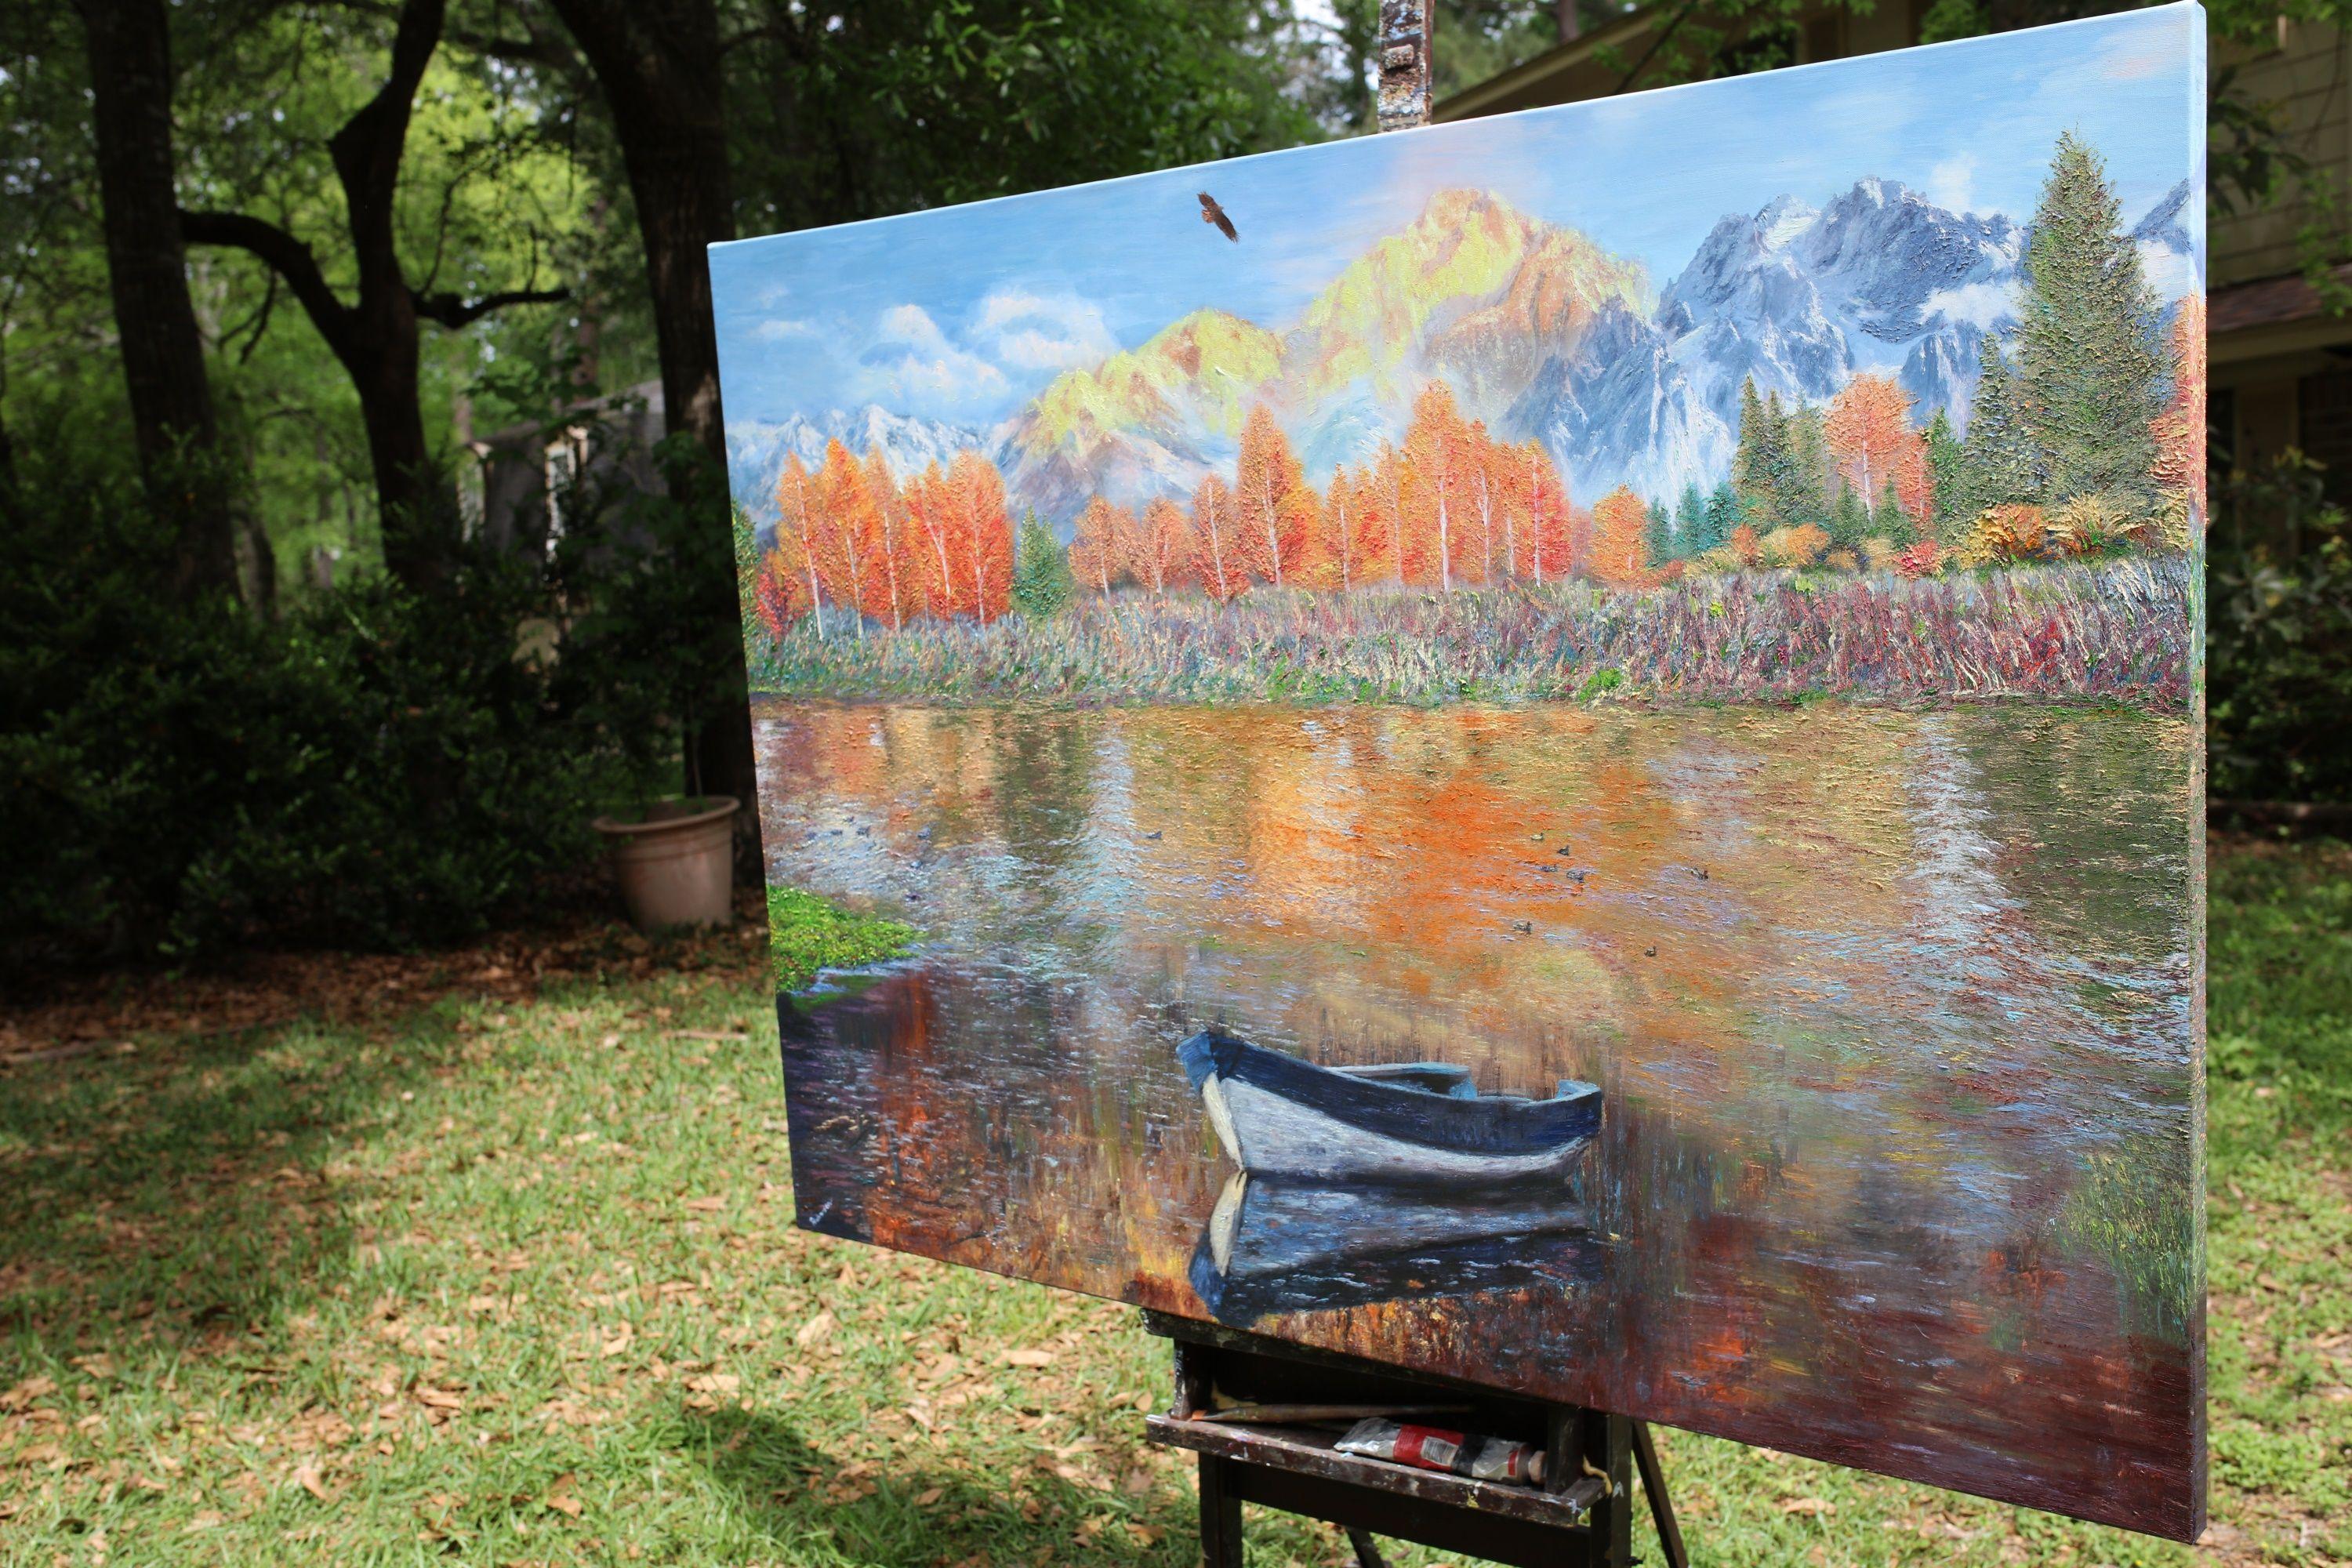 â€œAutumnal colors are radiant in this visage of a reflective scene of lake, boat, and woodland. The feeling is the nostalgic appreciation that everything has two sides.â€   The painting is executed in Clear Impressionism style in thick oils with